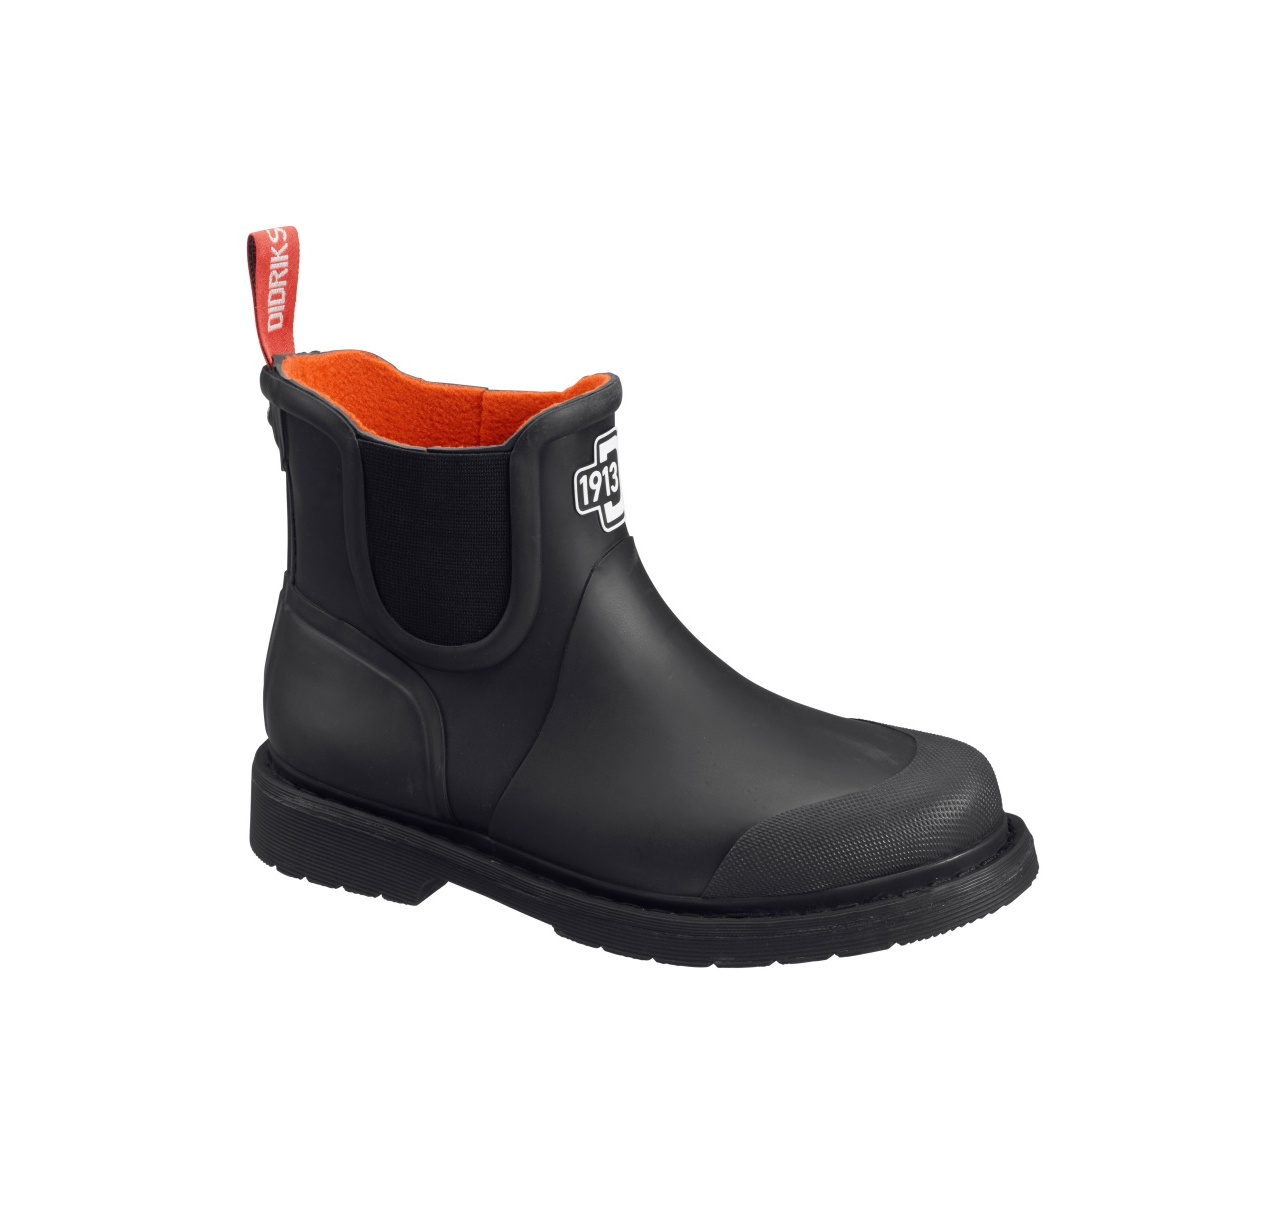 comfortable rubber boots for walking